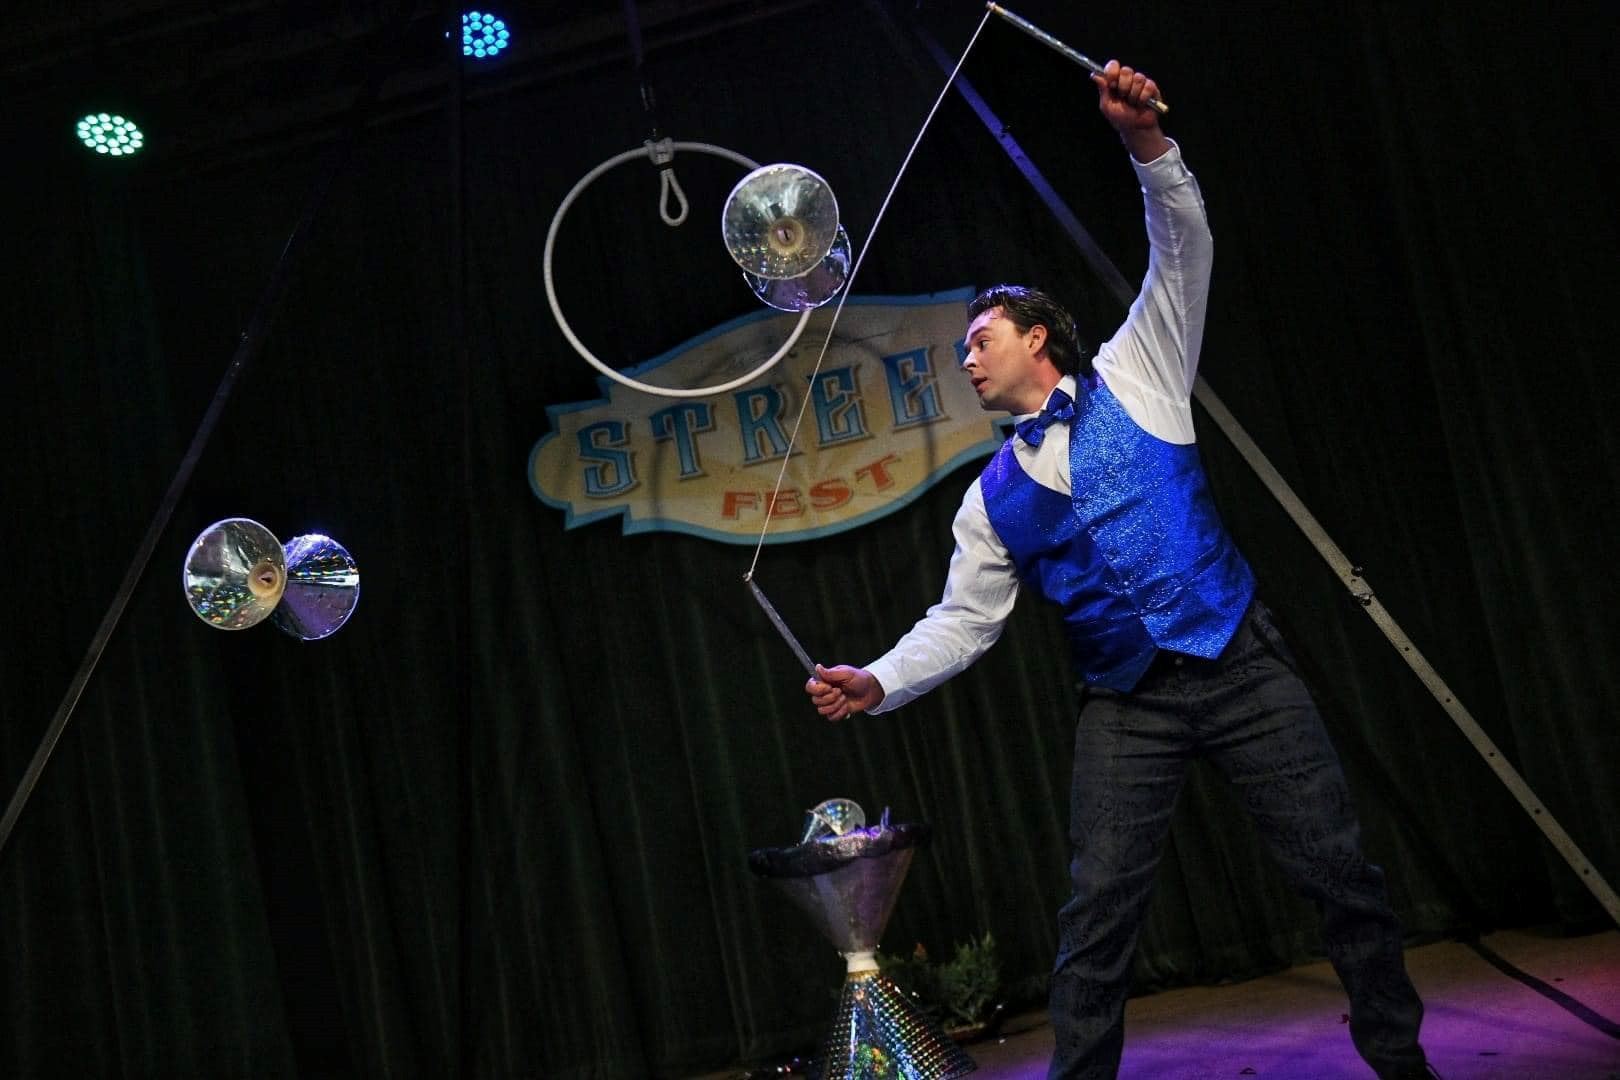 Check Out a Show with The Amazing Anastasini Circus